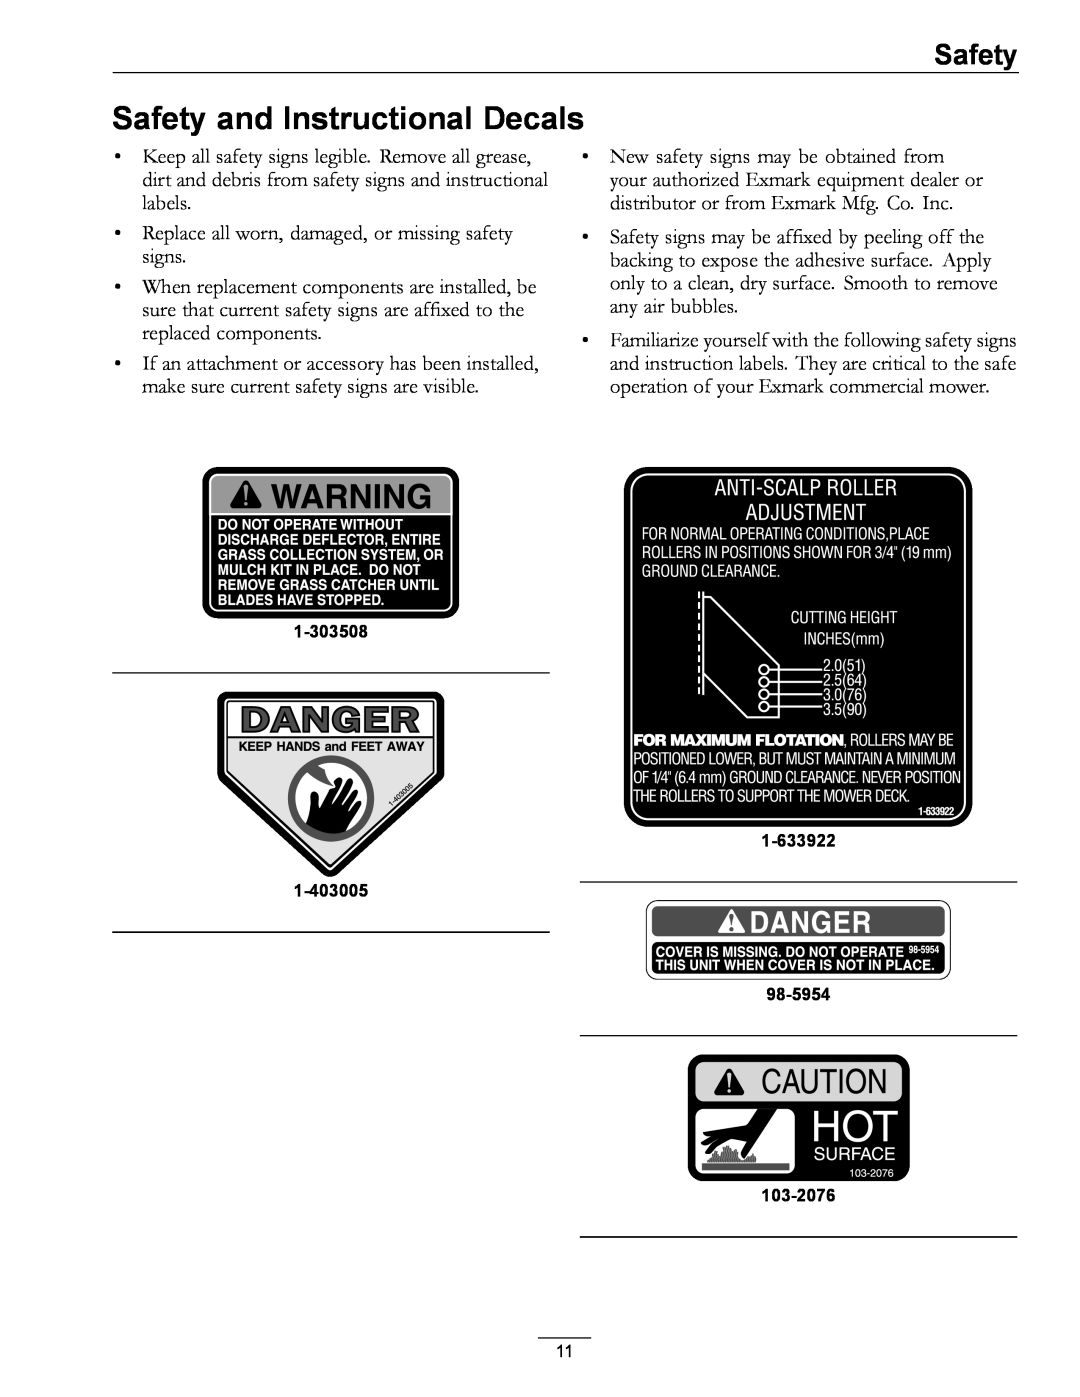 Exmark 920 manual Safety and Instructional Decals 